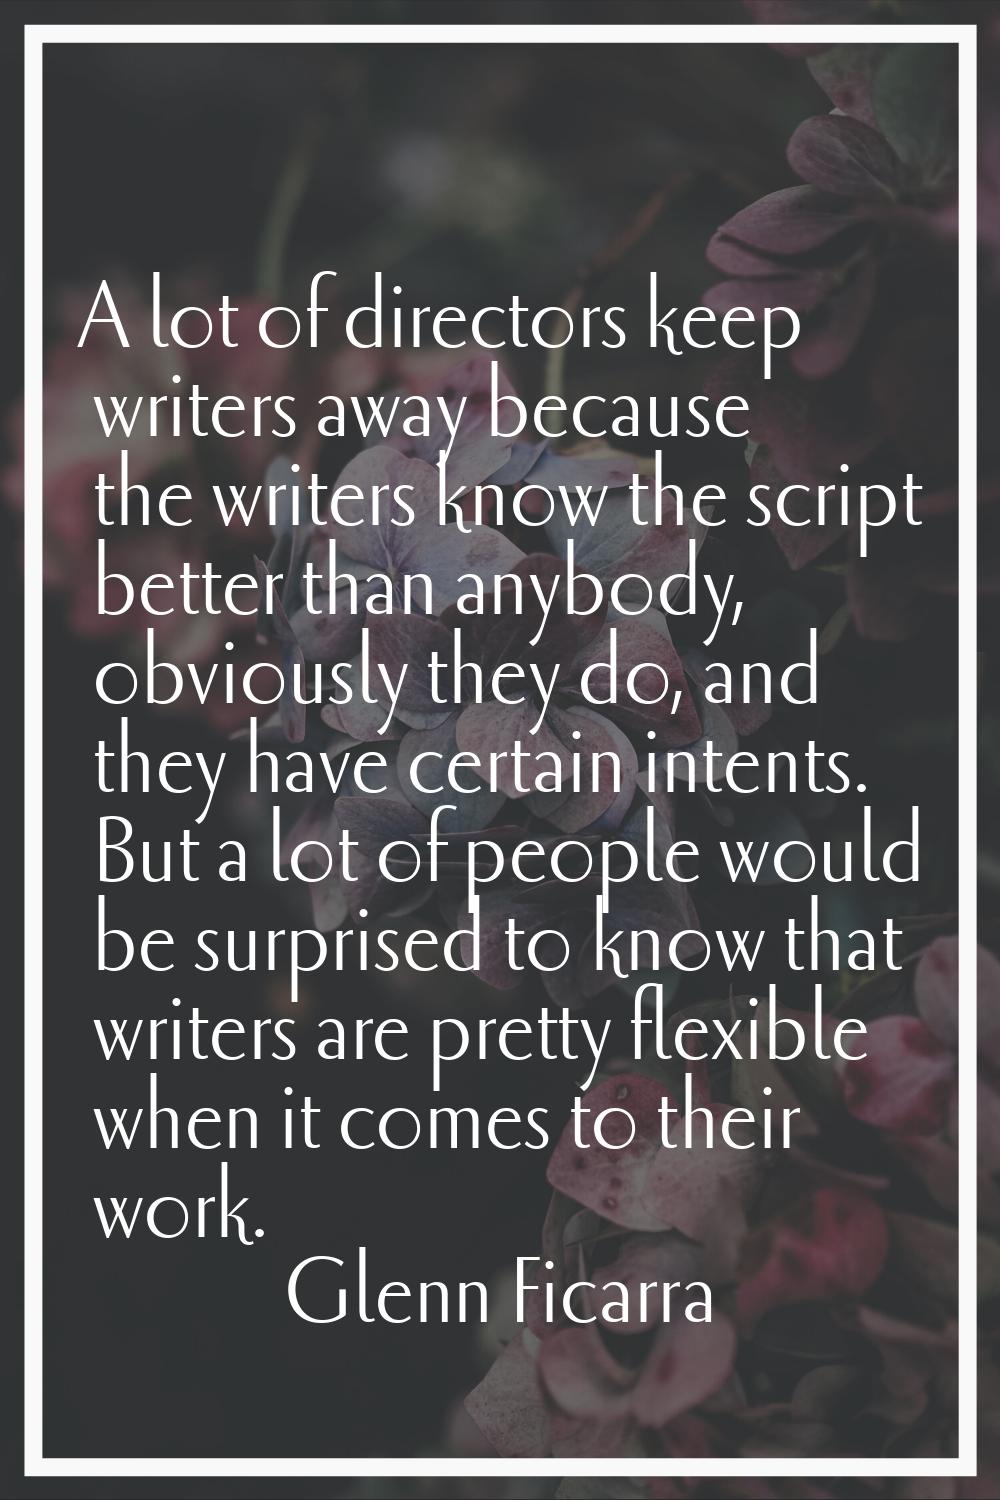 A lot of directors keep writers away because the writers know the script better than anybody, obvio